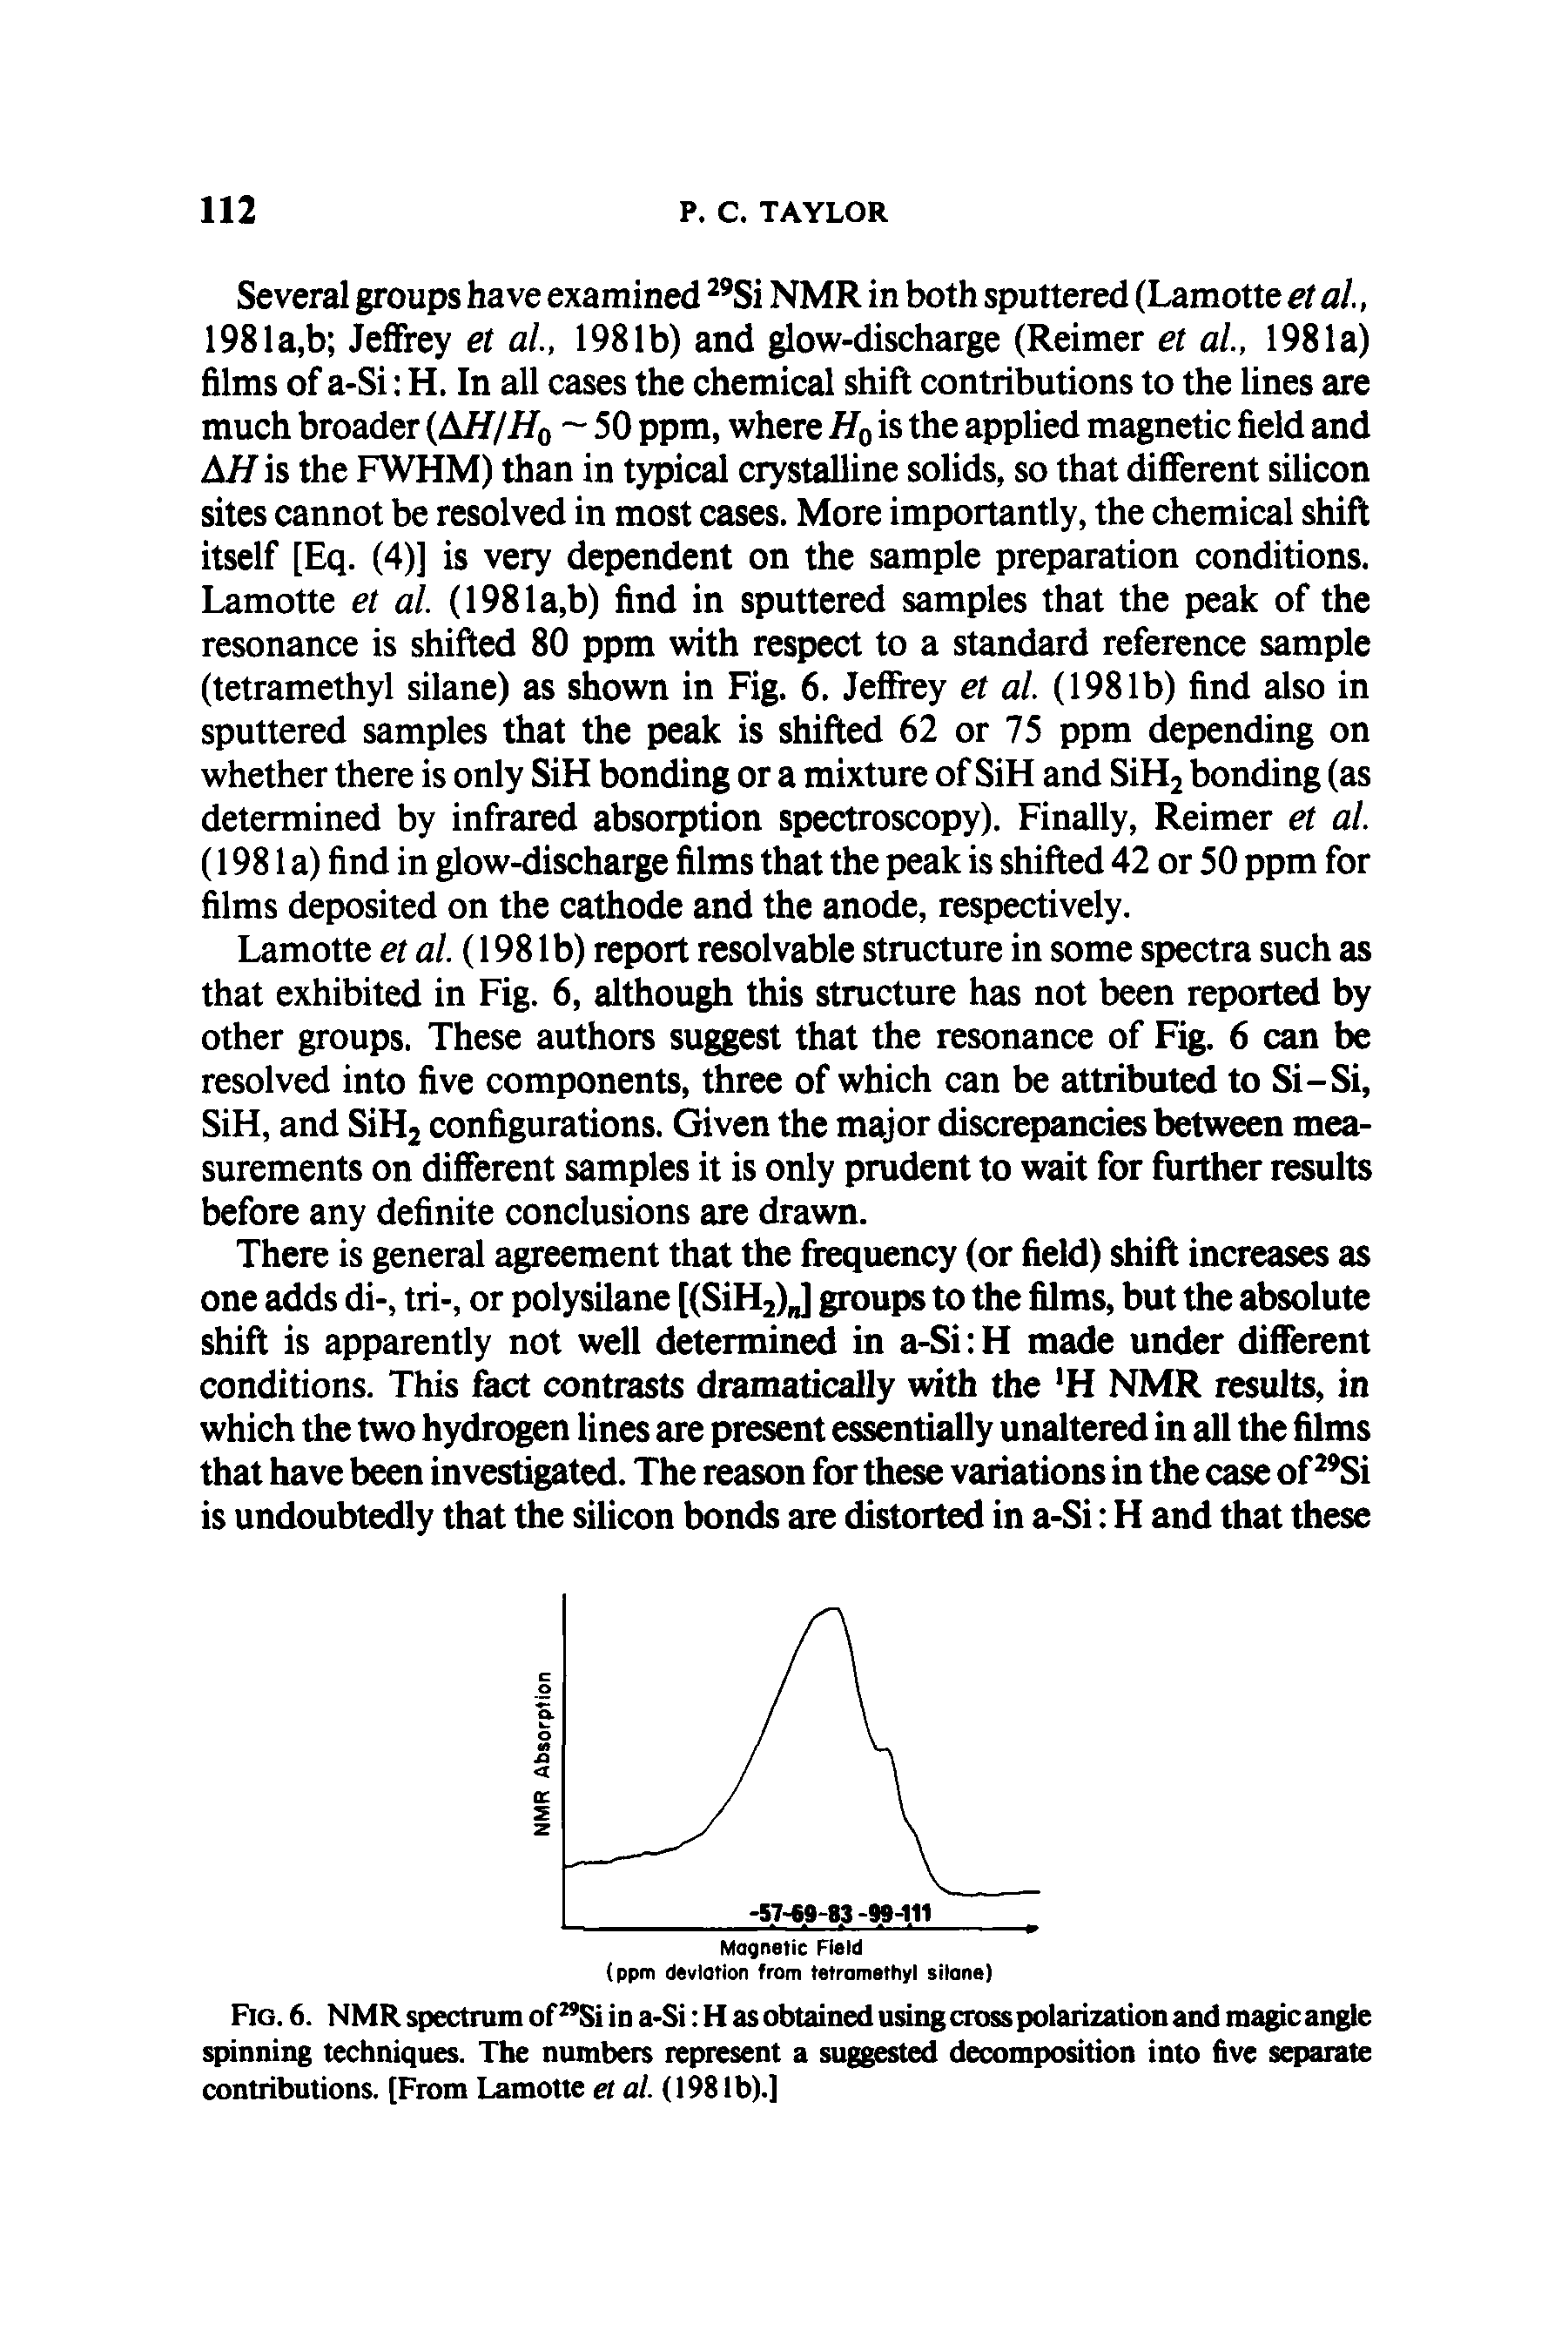 Fig. 6. NMR spectrum of Si in a-Si H as obtained using cross polarization and magic angle spinning techniques. The numbers represent a suggested decomposition into five separate contributions. [From Lamotte et al. (1981b).]...